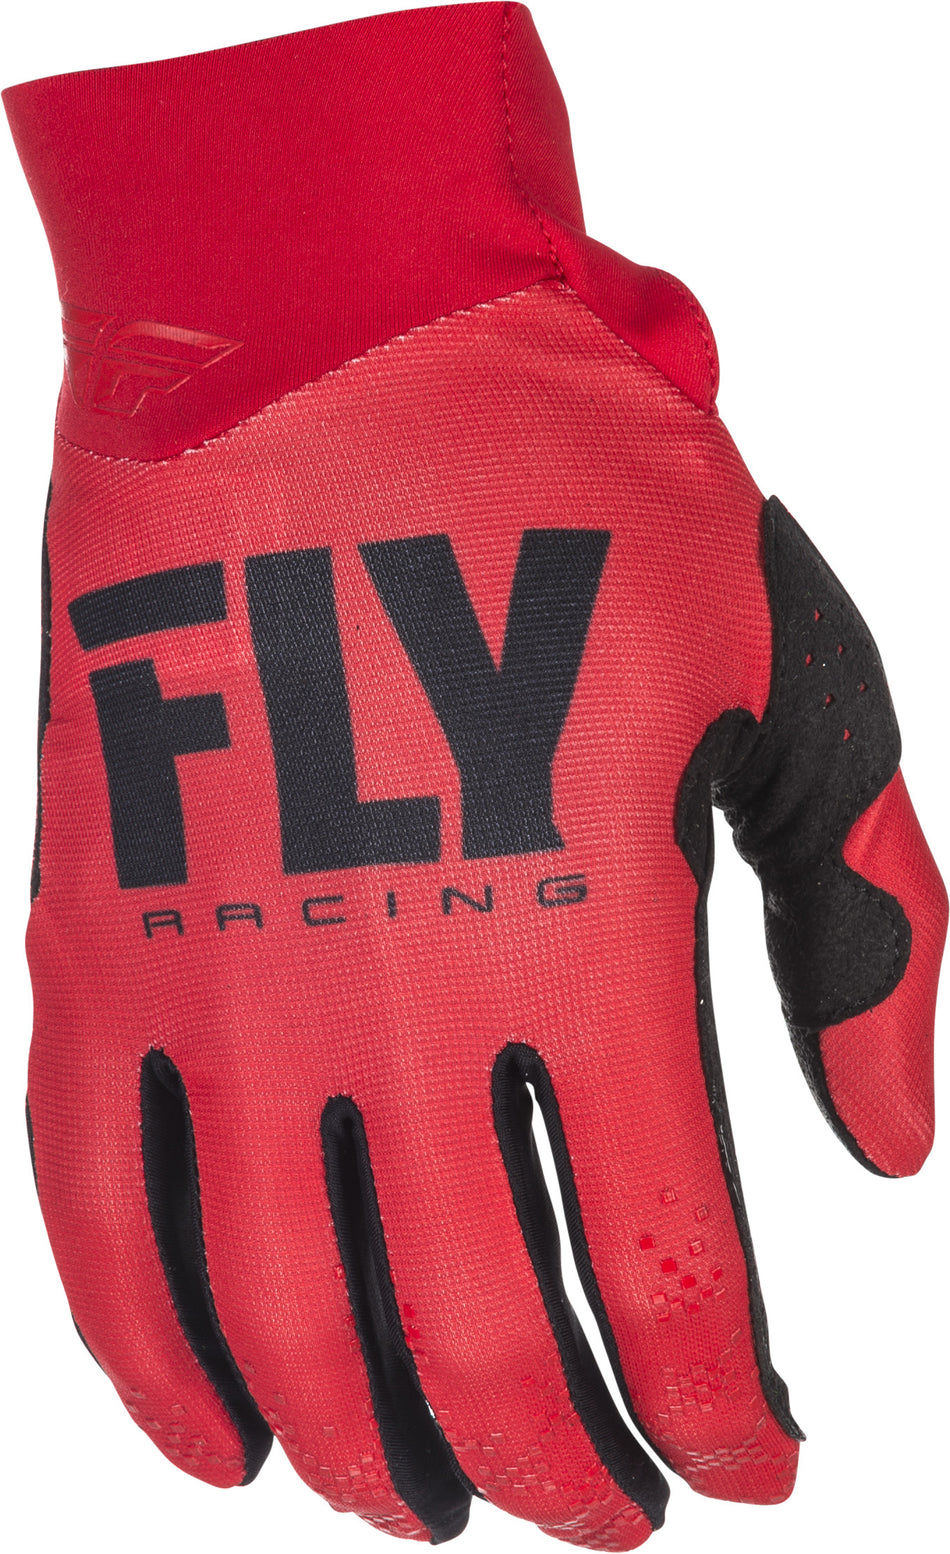 FLY RACING Pro Lite Gloves Red Sz 8 371-81208